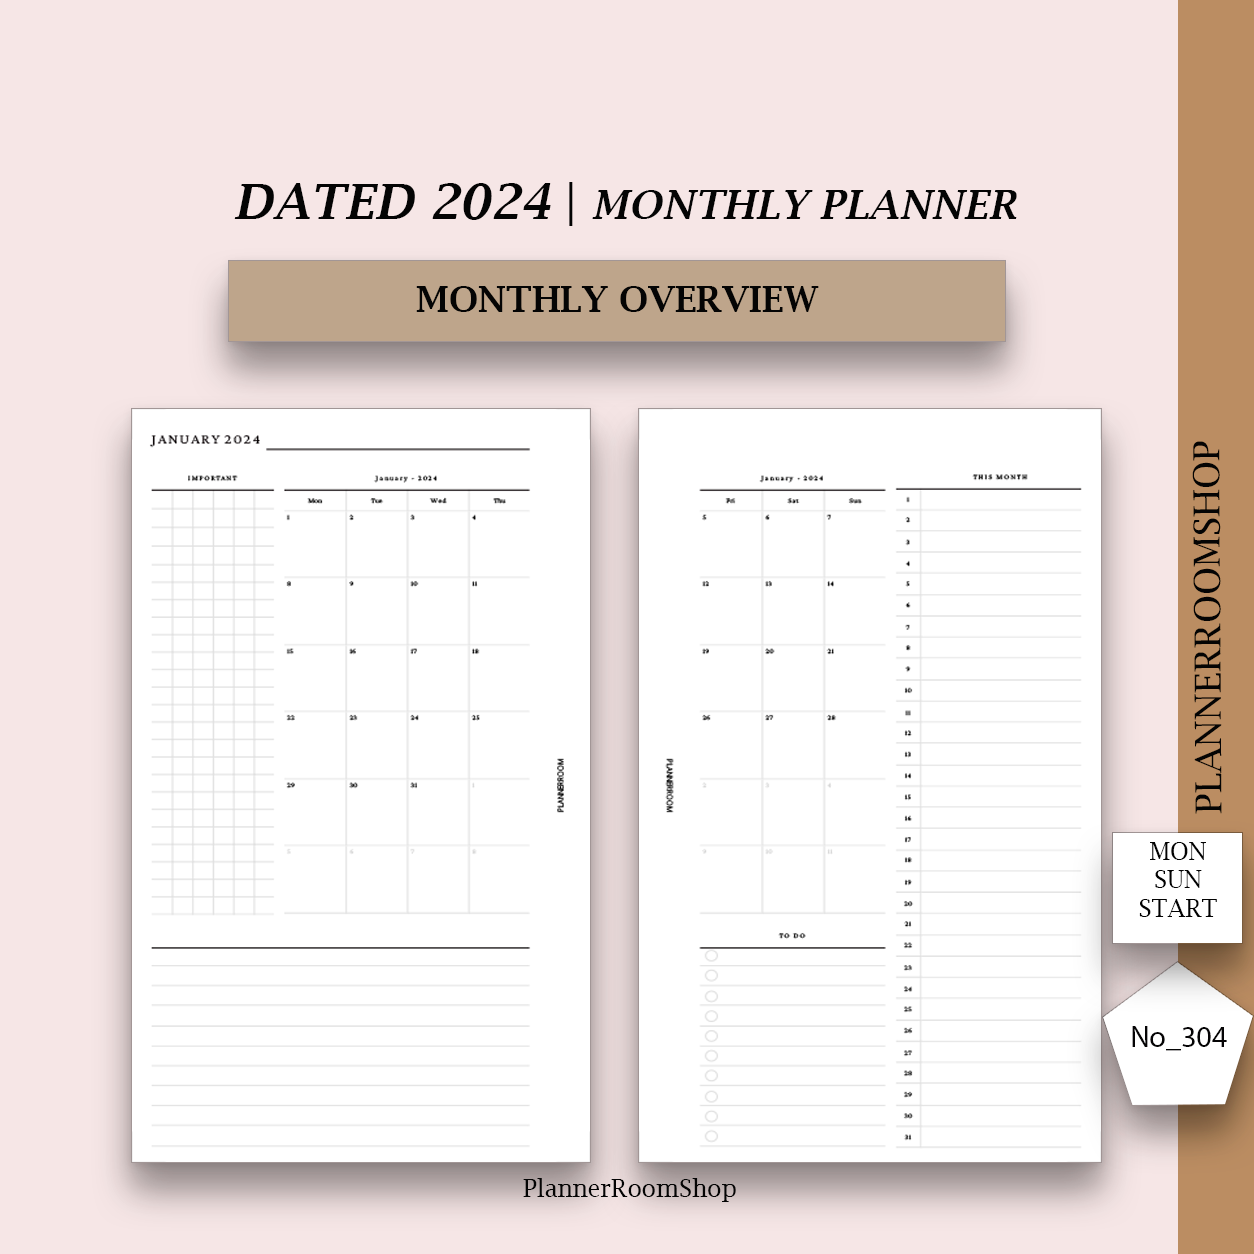 Monthly Planner: Free Monthly Schedule Planner Template